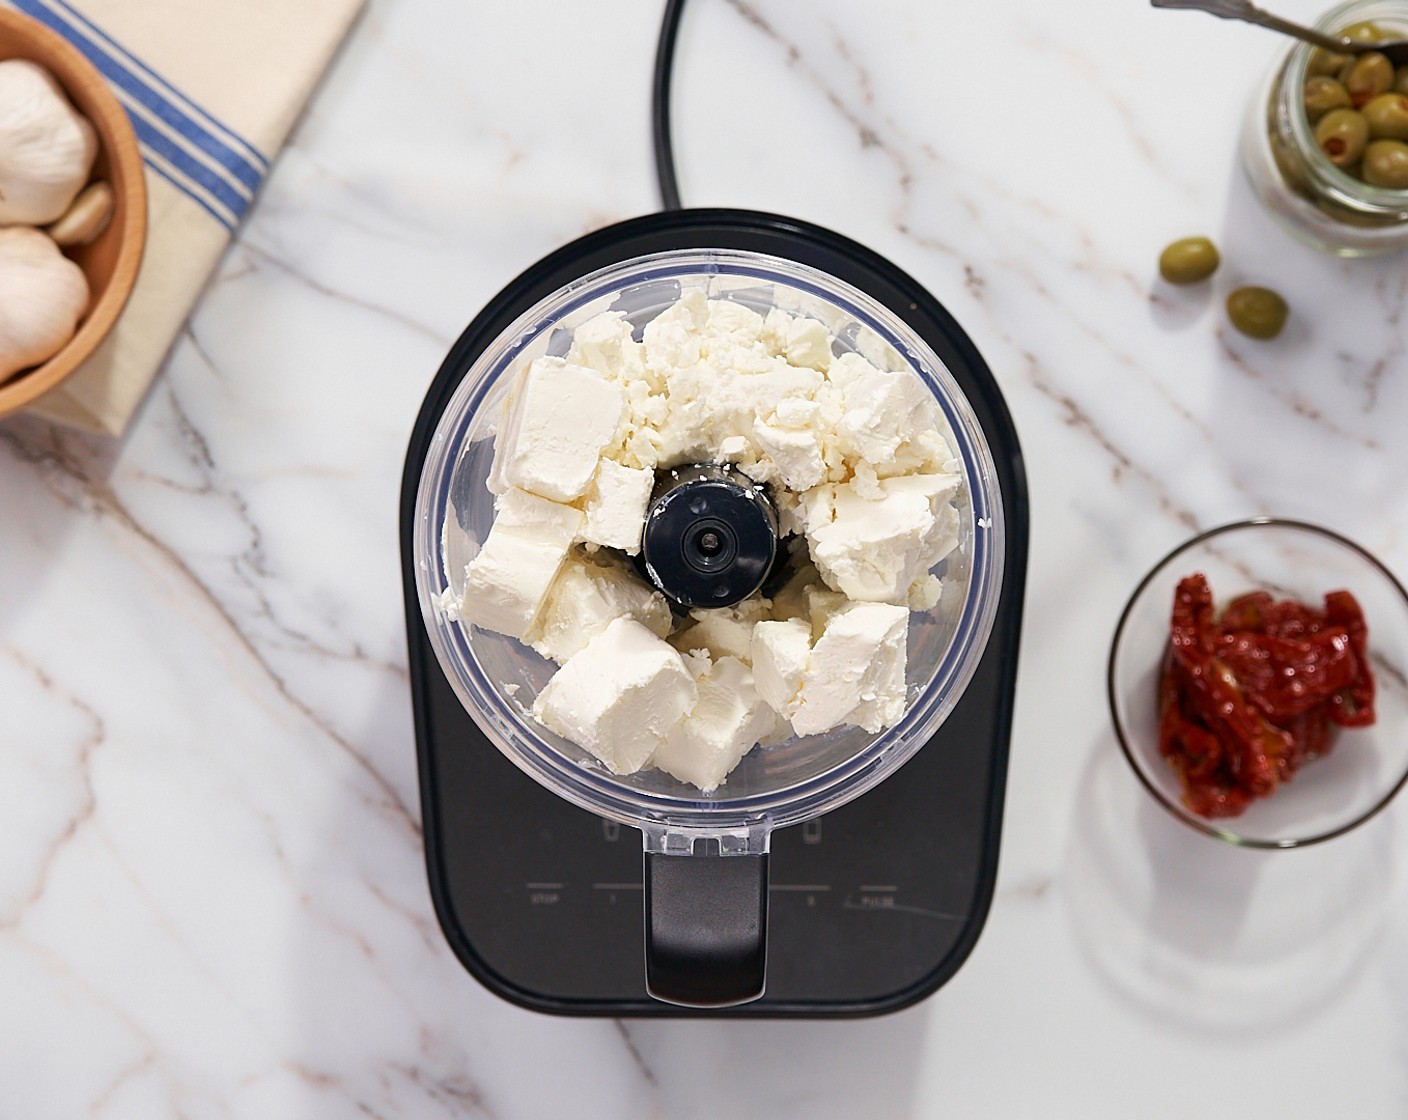 step 1 Add Feta Cheese (1 1/2 cups) and Cream Cheese (1/2 cup) to a food processor or blender. Blend until smooth and creamy.